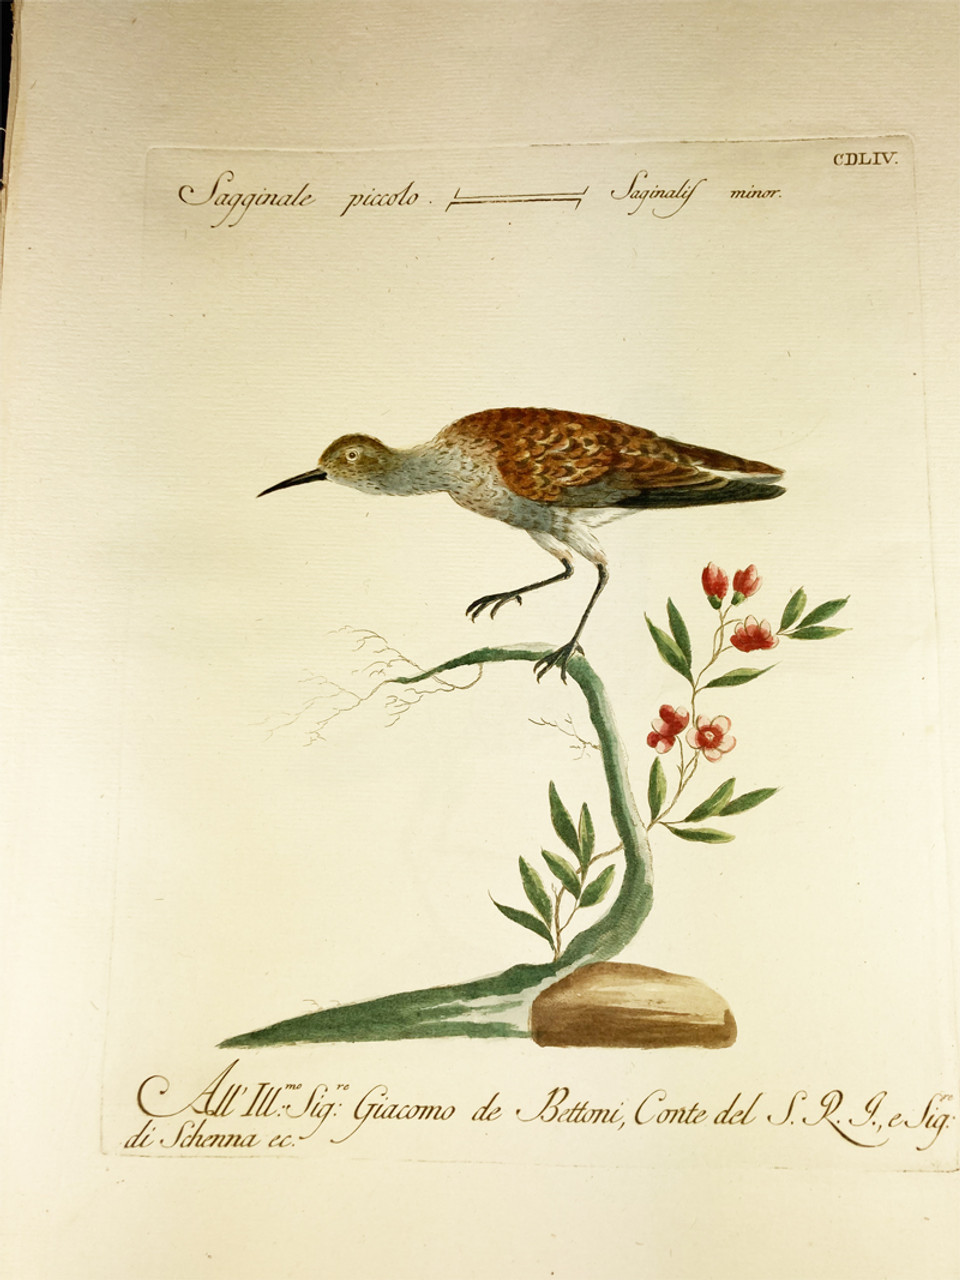 Plover by Saverio Manetti 1767-1776 Italy original watercolor copper plate engraving on rag paper antique print